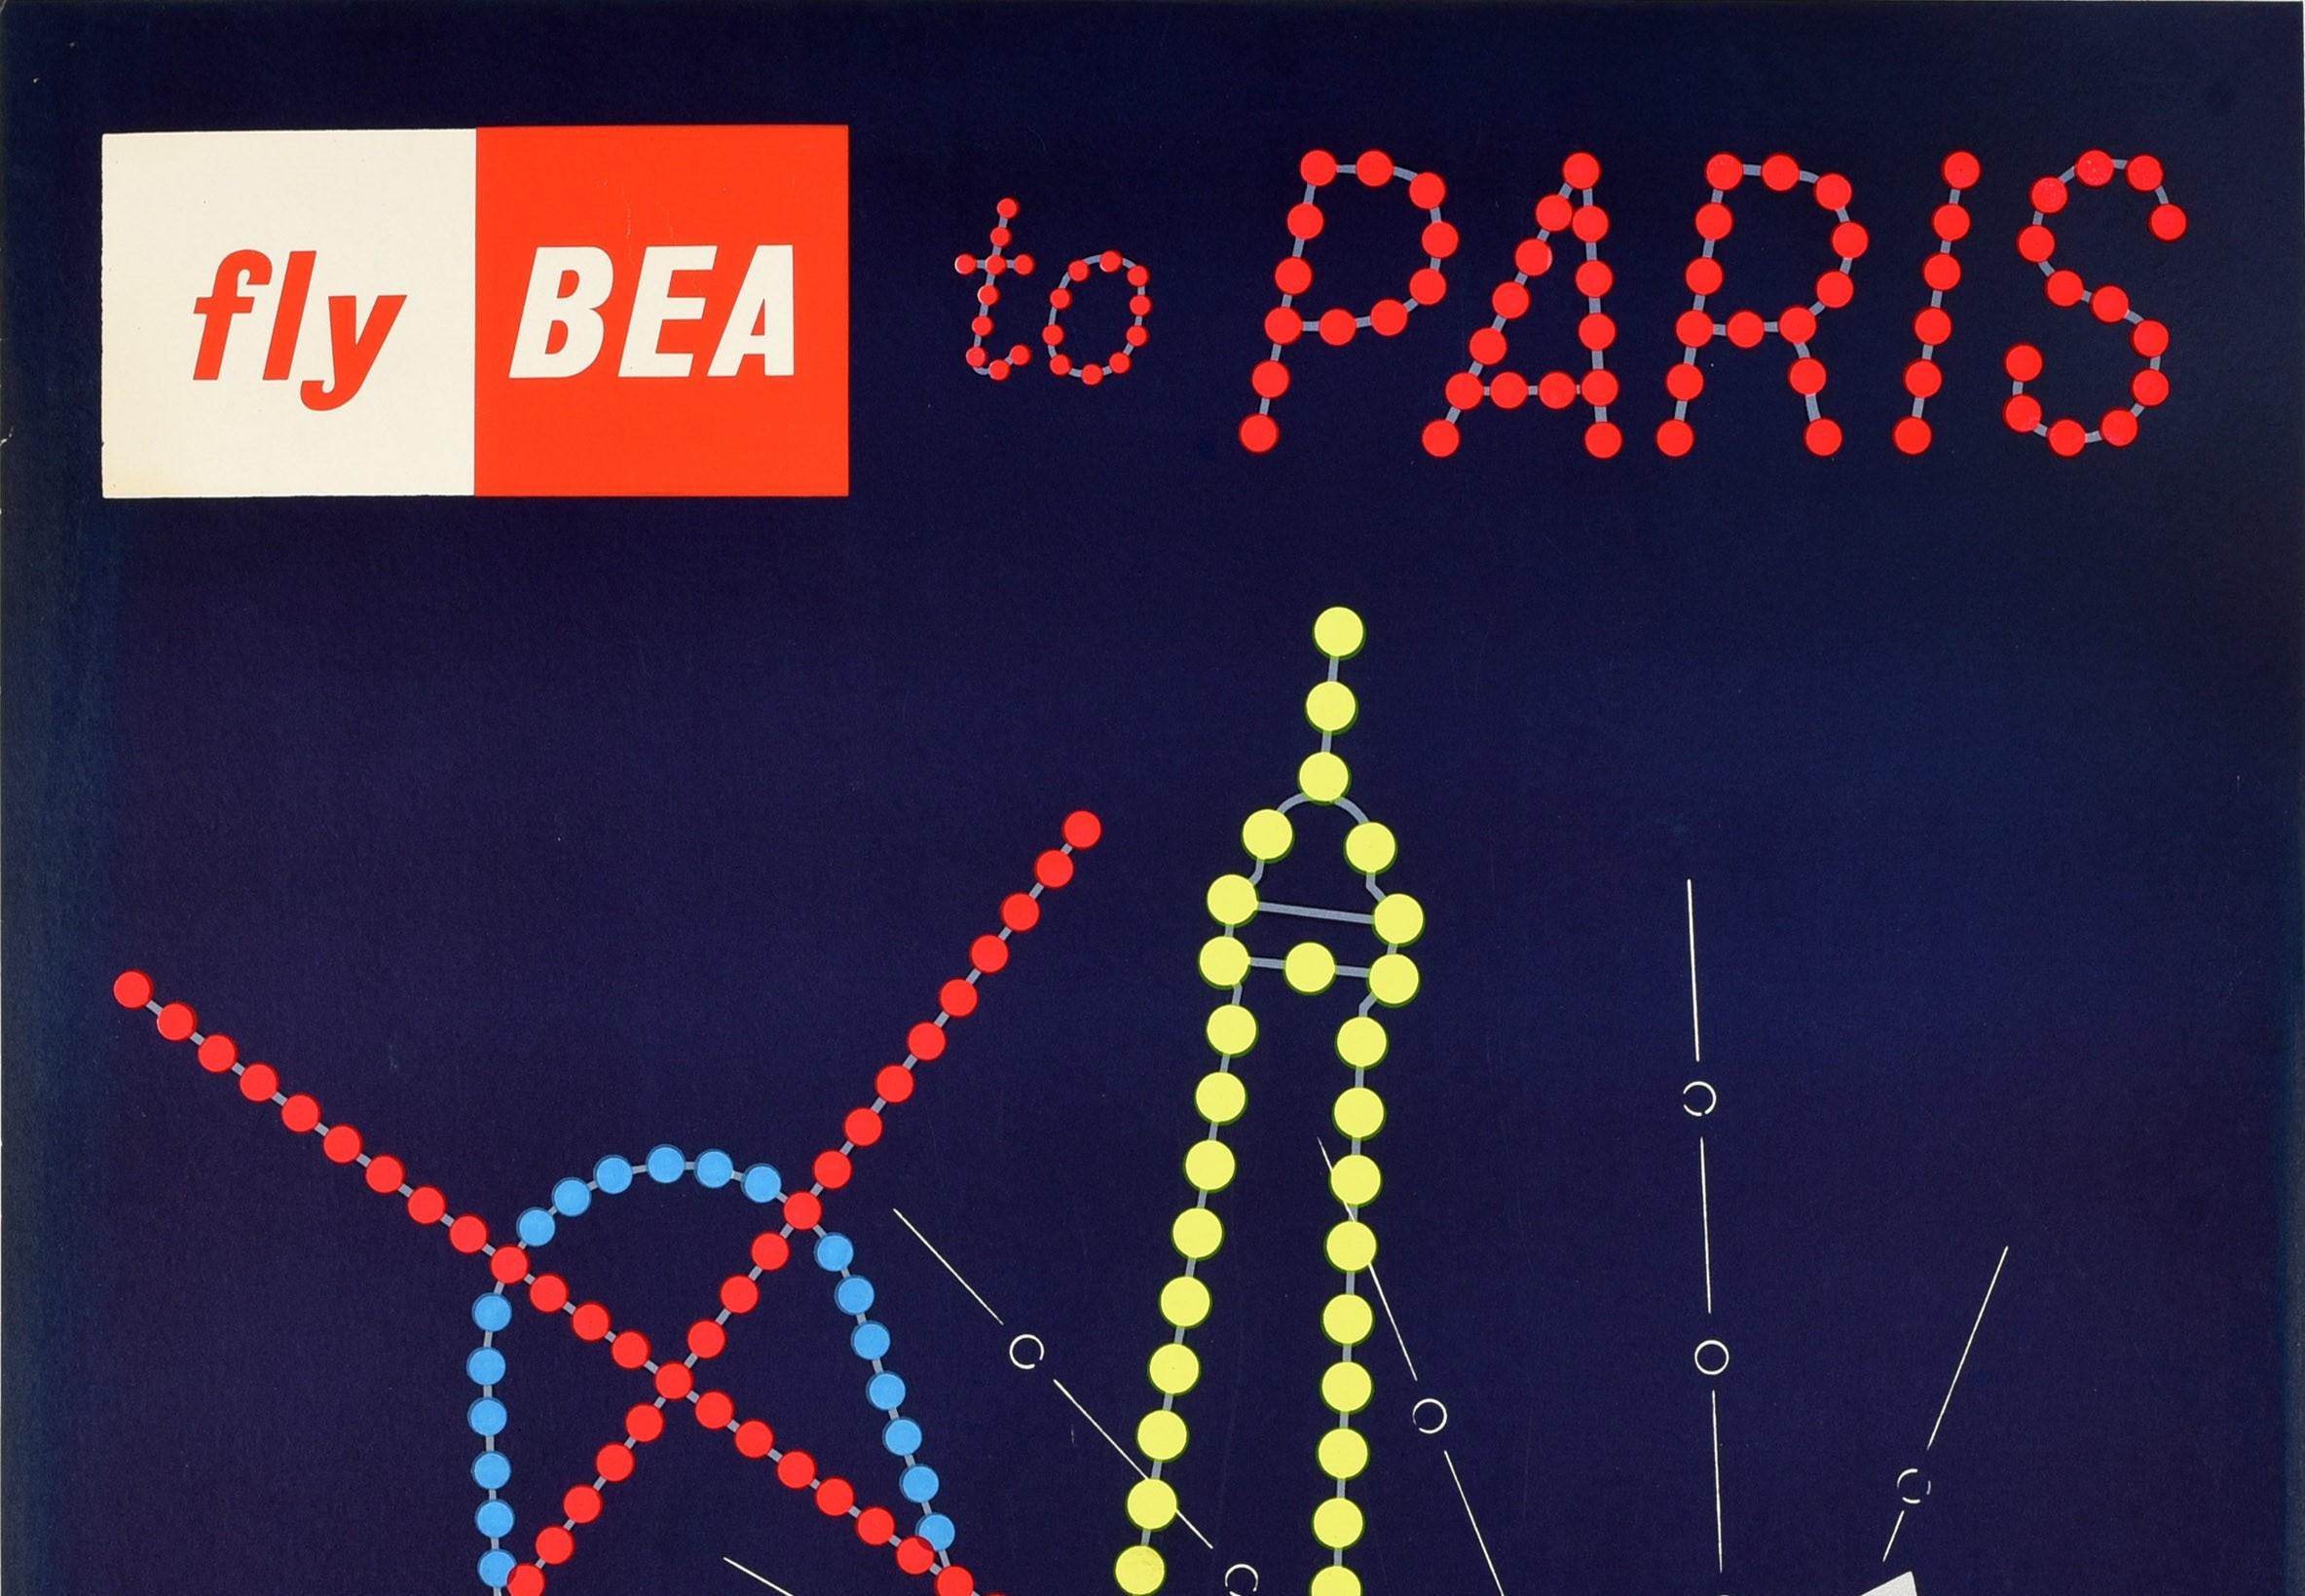 Original vintage airline travel poster - Fly BEA to Paris - depicting a colourful design of a sparkling wine champagne glass with outlines of the Eiffel Tower in yellow dots and the Montmartre Moulin Rouge windmill in blue and red dots like lights